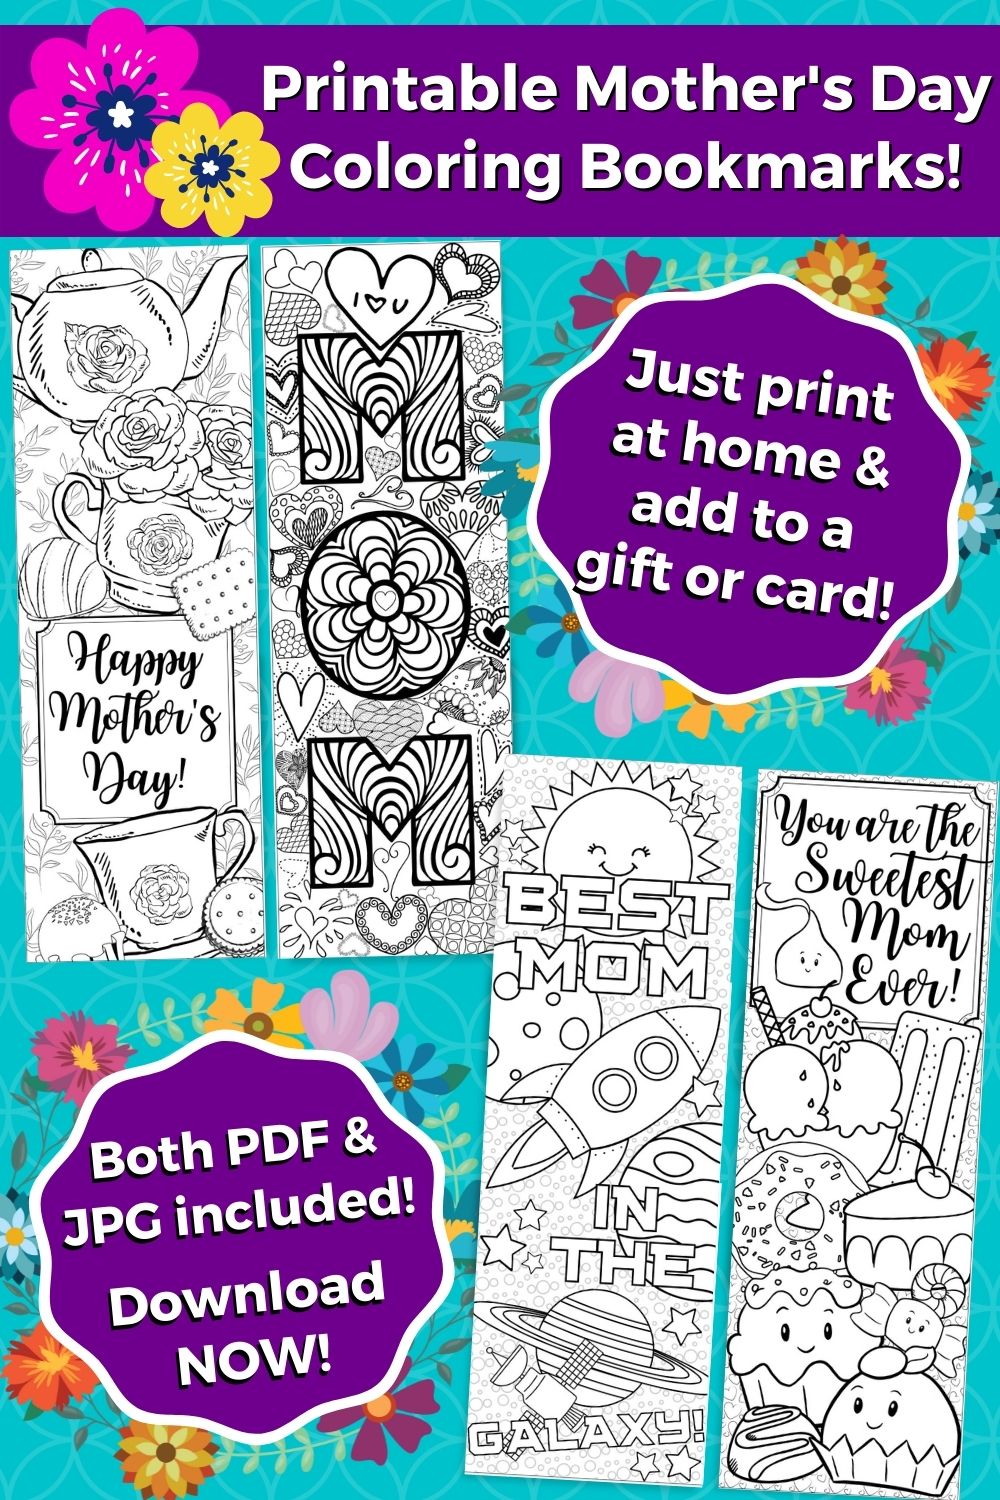 4 Printable Mother's Day Coloring Bookmarks - For Instant Download